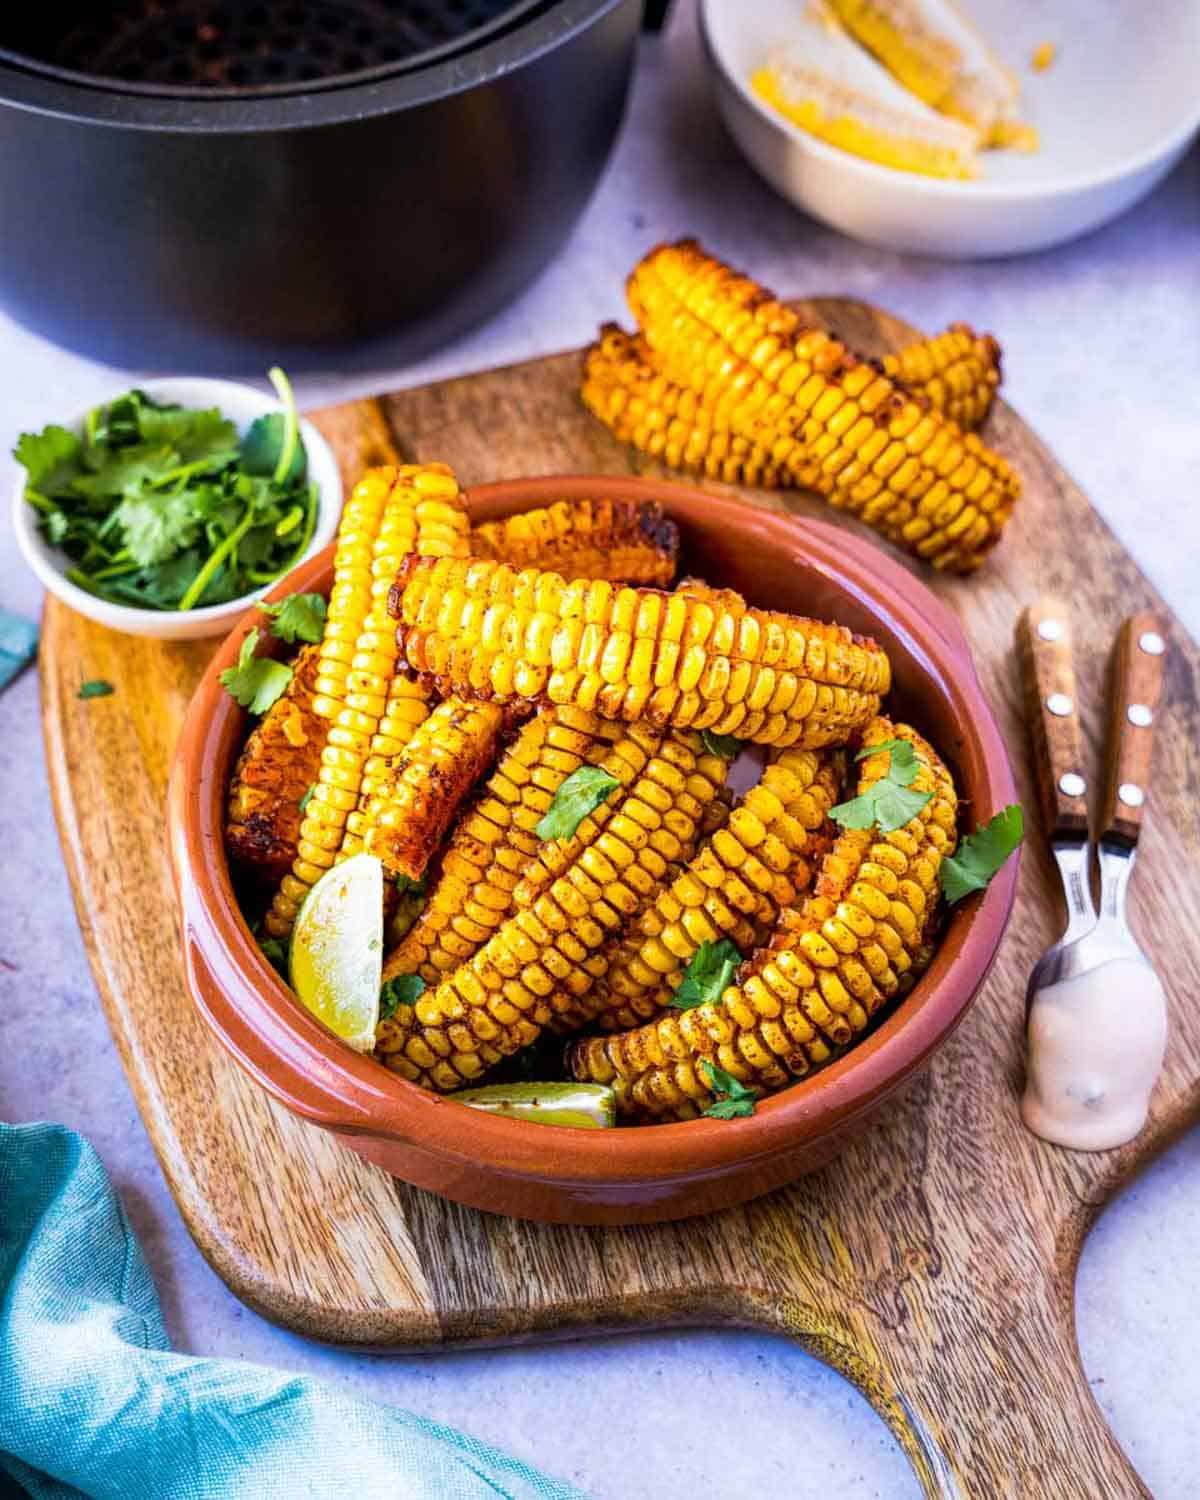 Corn Ribs set on a wooden tray in a terracotta colored bowl garnished with lime and cilantro.